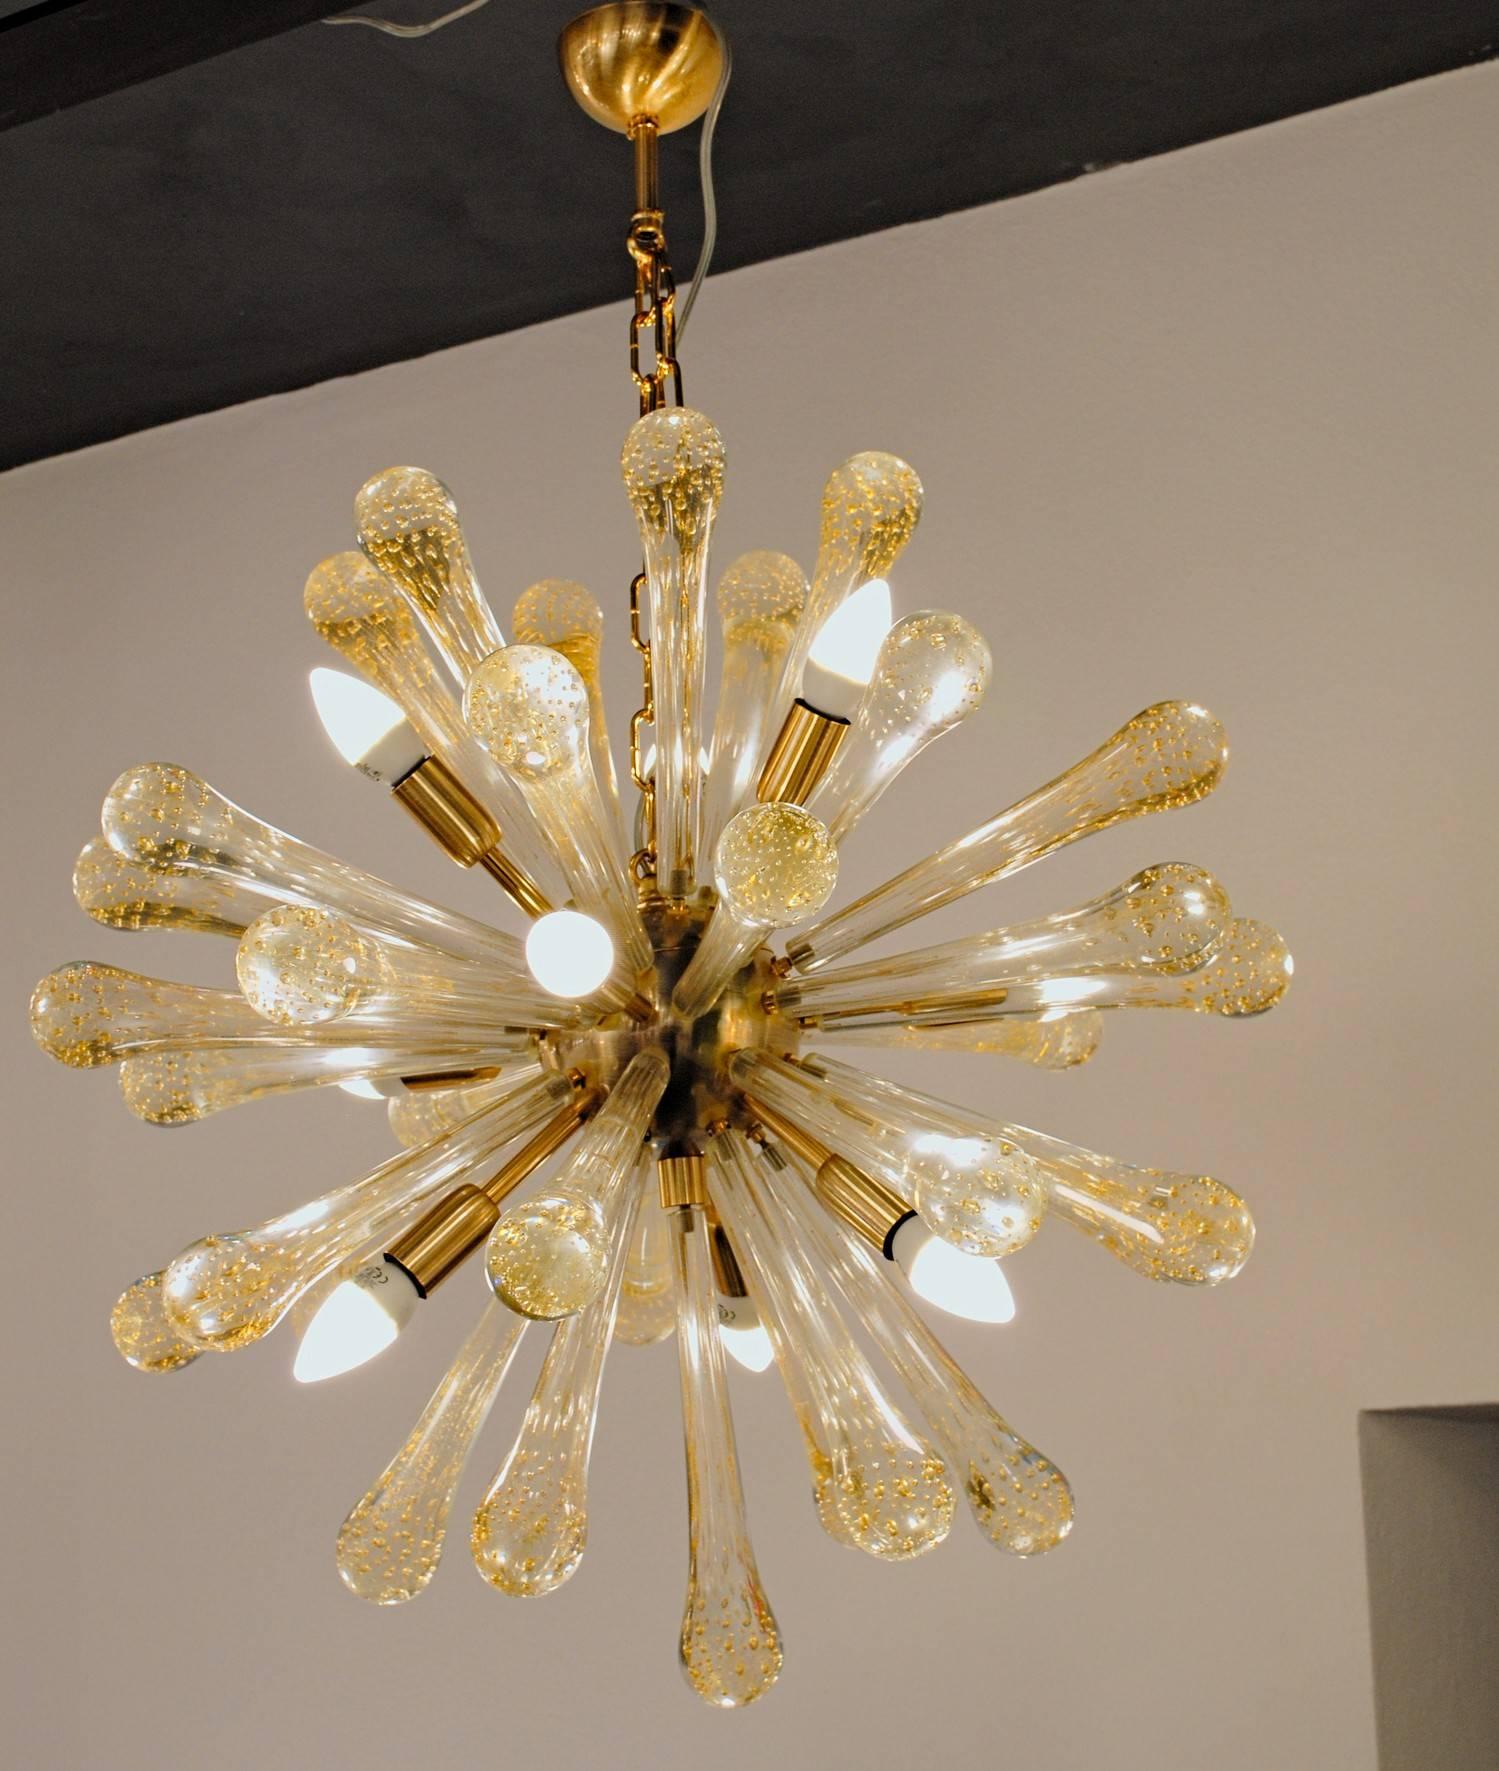 Teardrop shaped glass elements with Baloton finish and pure gold leaf. 
The mix of lens effect made by the bubbles and warm mirror reflection made by the gold speckling creates a beautiful play with light.

Midcentury Sputnik chandelier. Murano